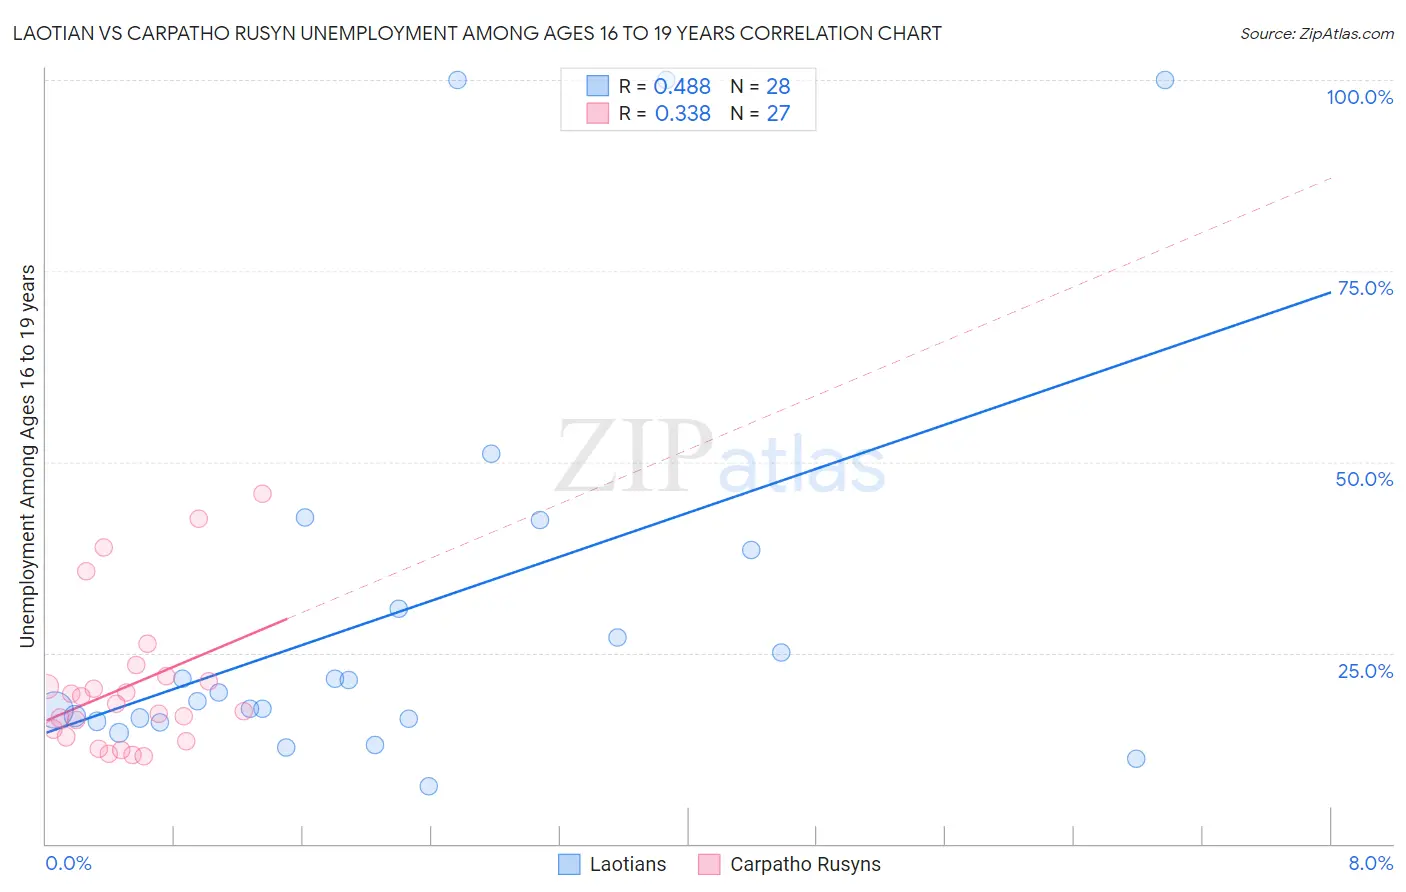 Laotian vs Carpatho Rusyn Unemployment Among Ages 16 to 19 years